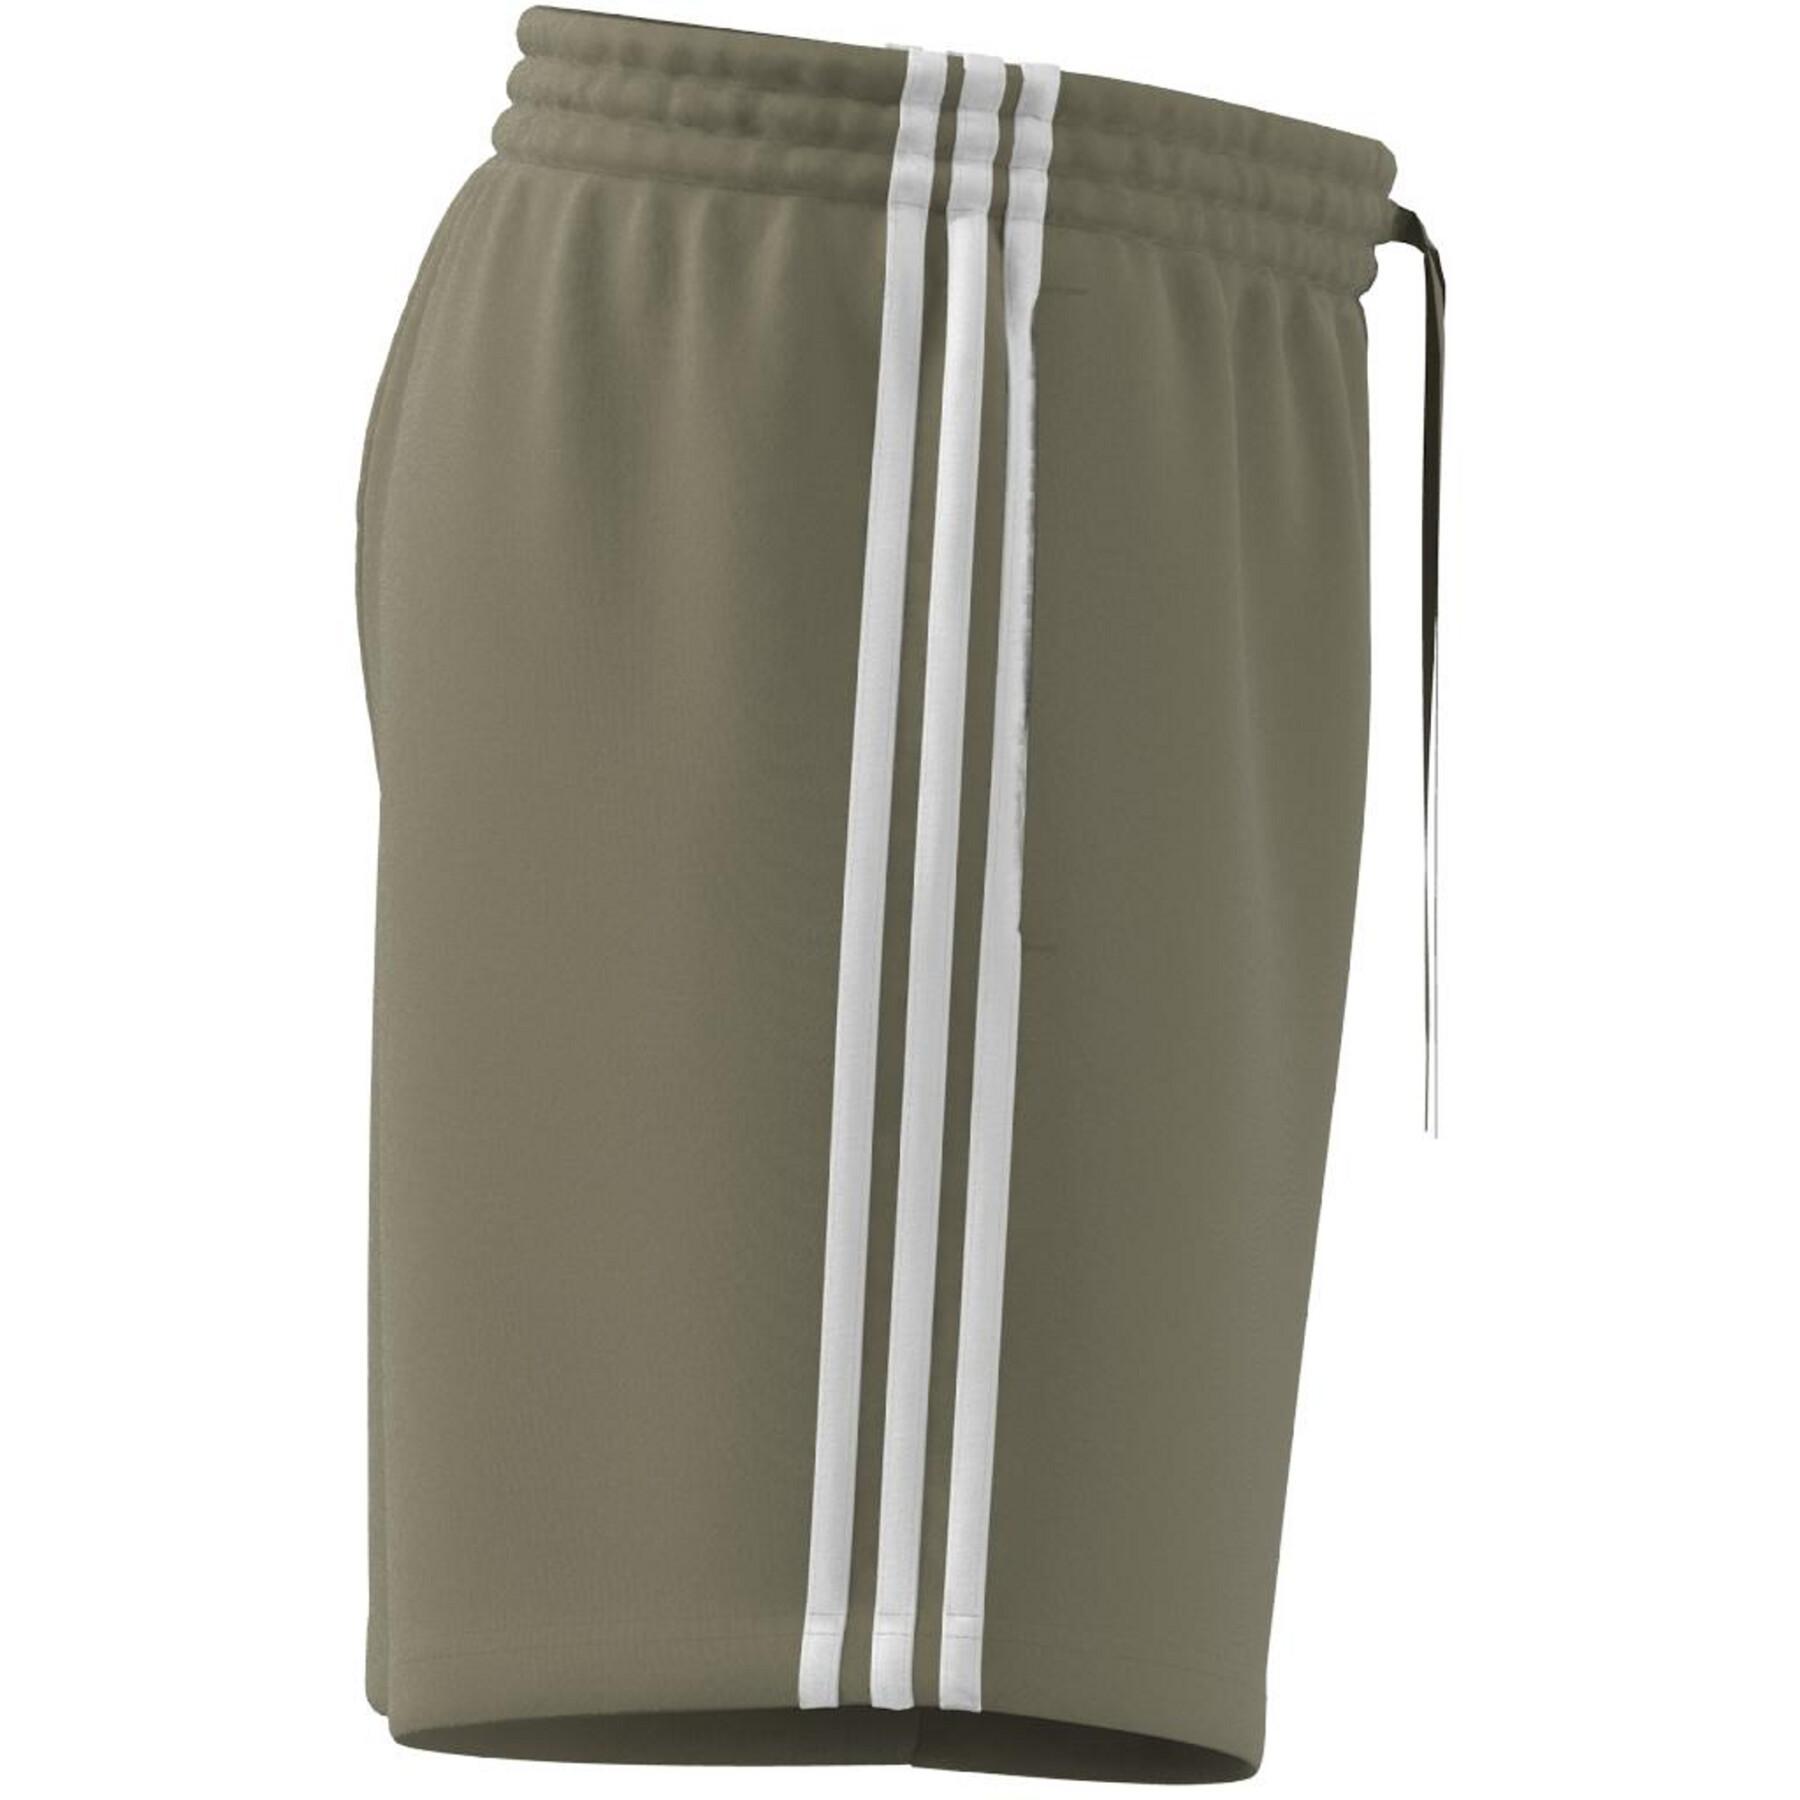 Short adidas Essentials French Terry